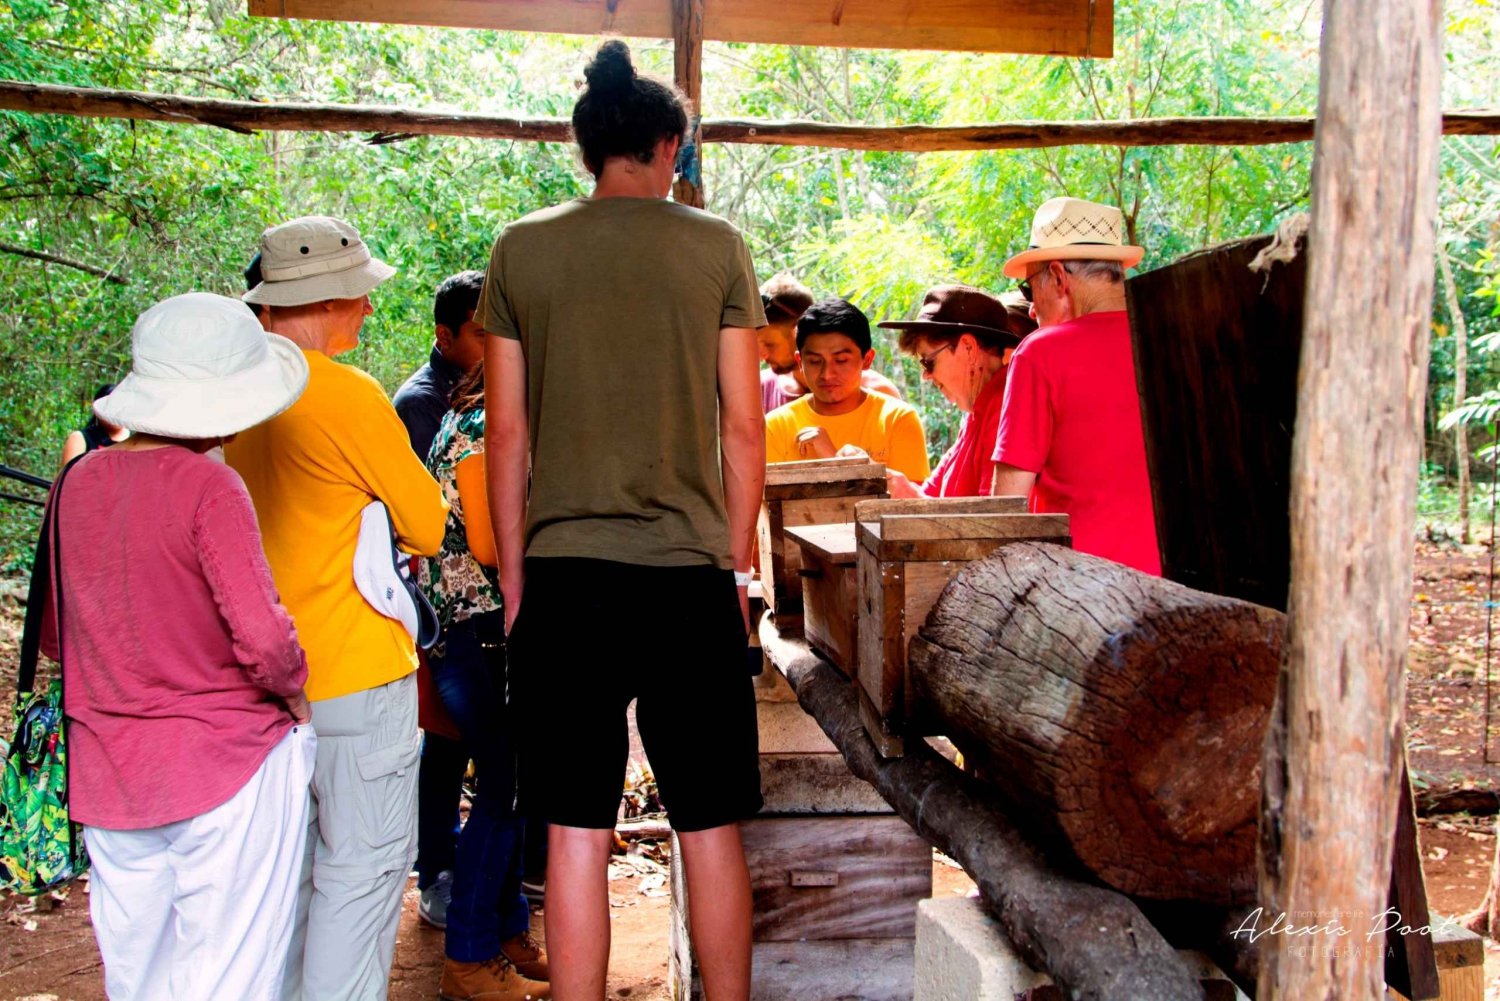 Xkopek, Mayan Bees Tour and Honey Tasting in Valladolid